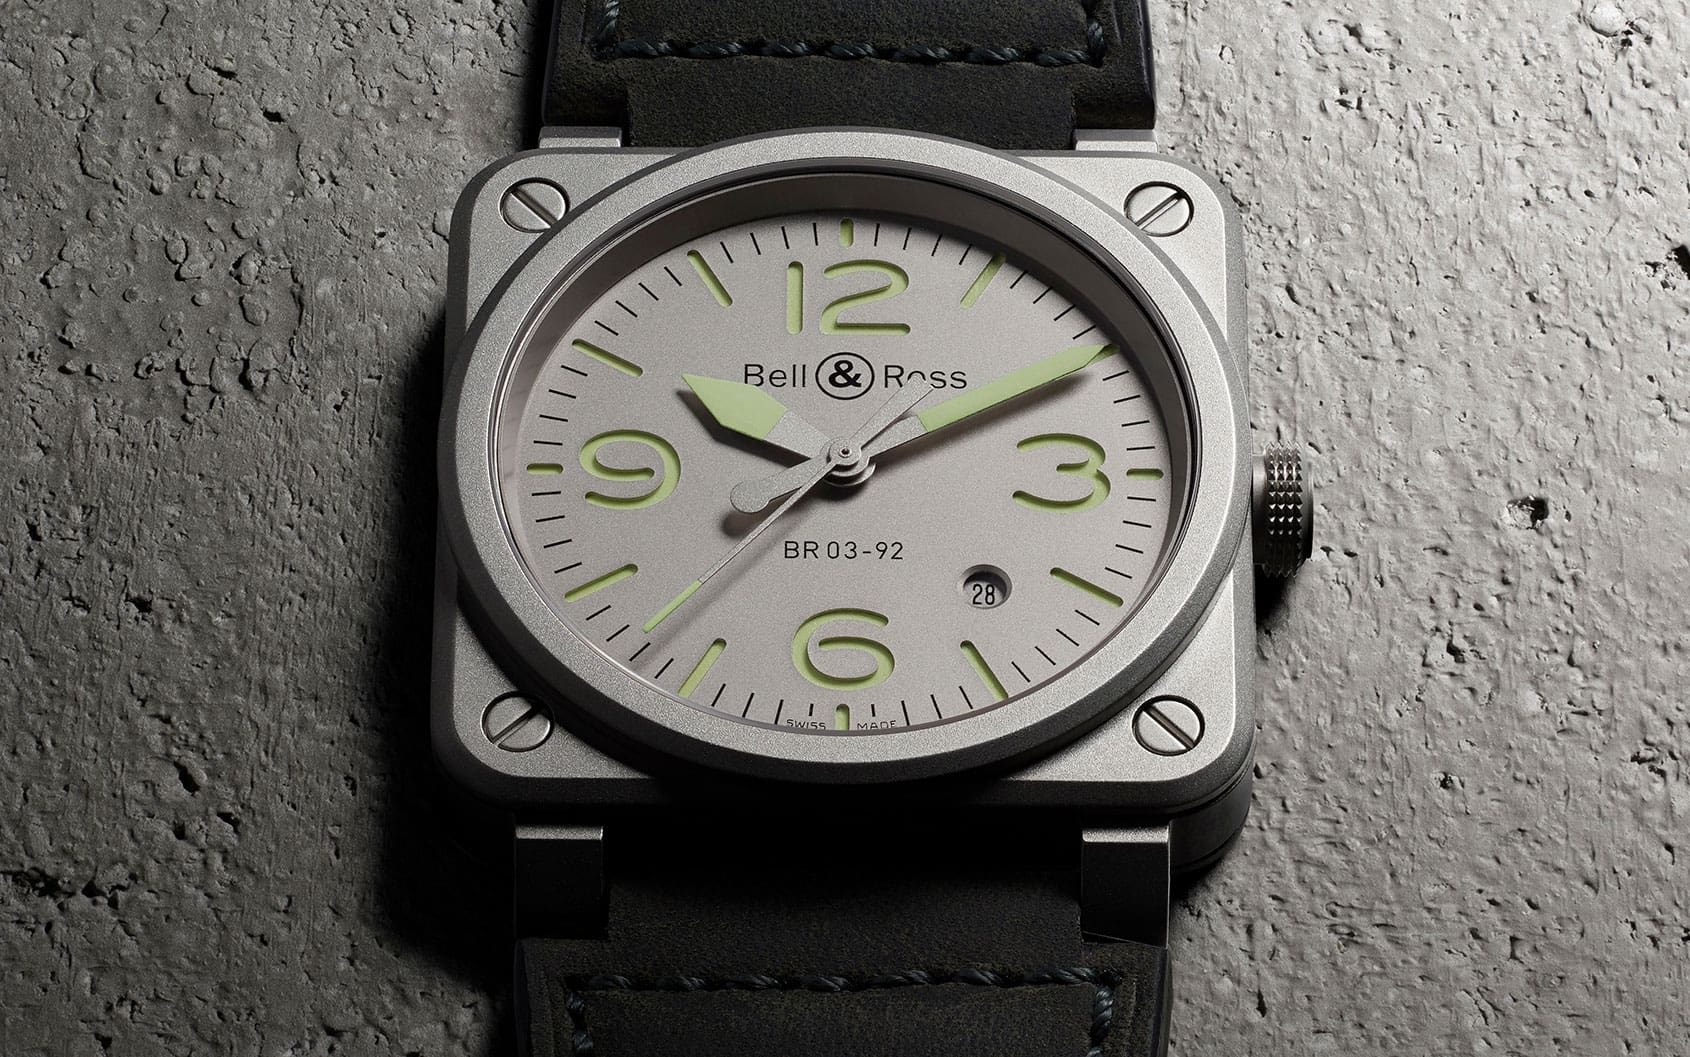 INTRODUCING: Bell & Ross meets brutalism with the BR 03-92 Horolum